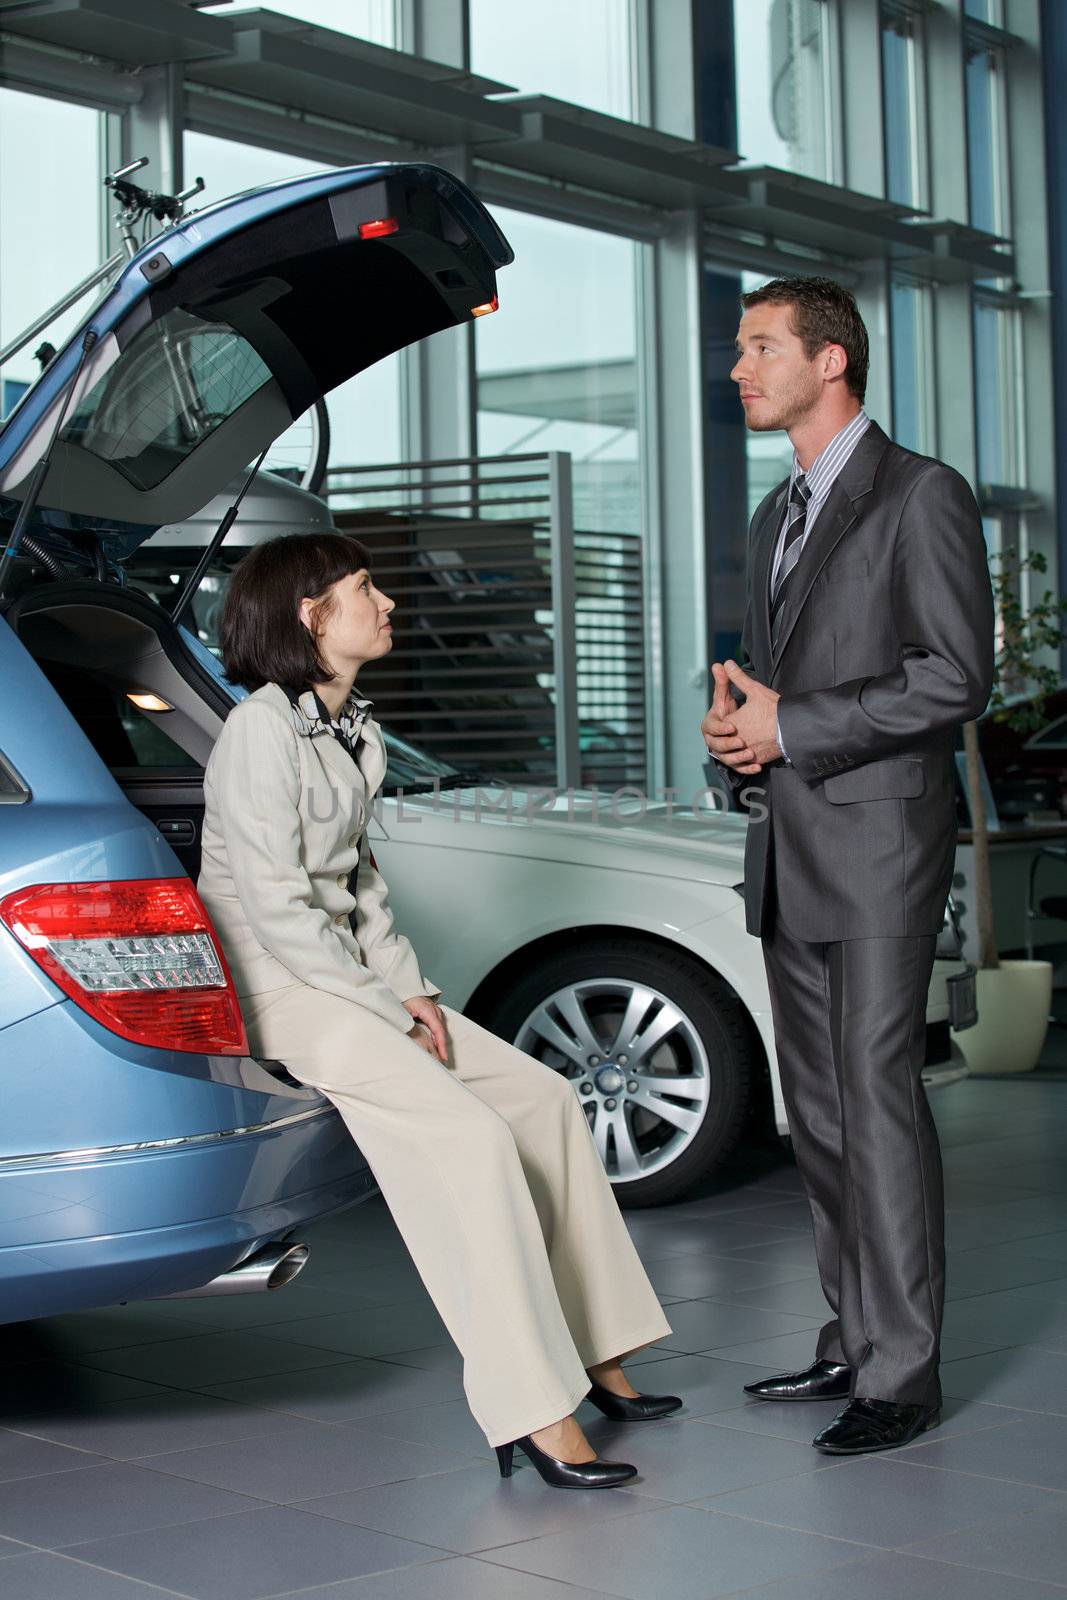 Car sales person talking with customer